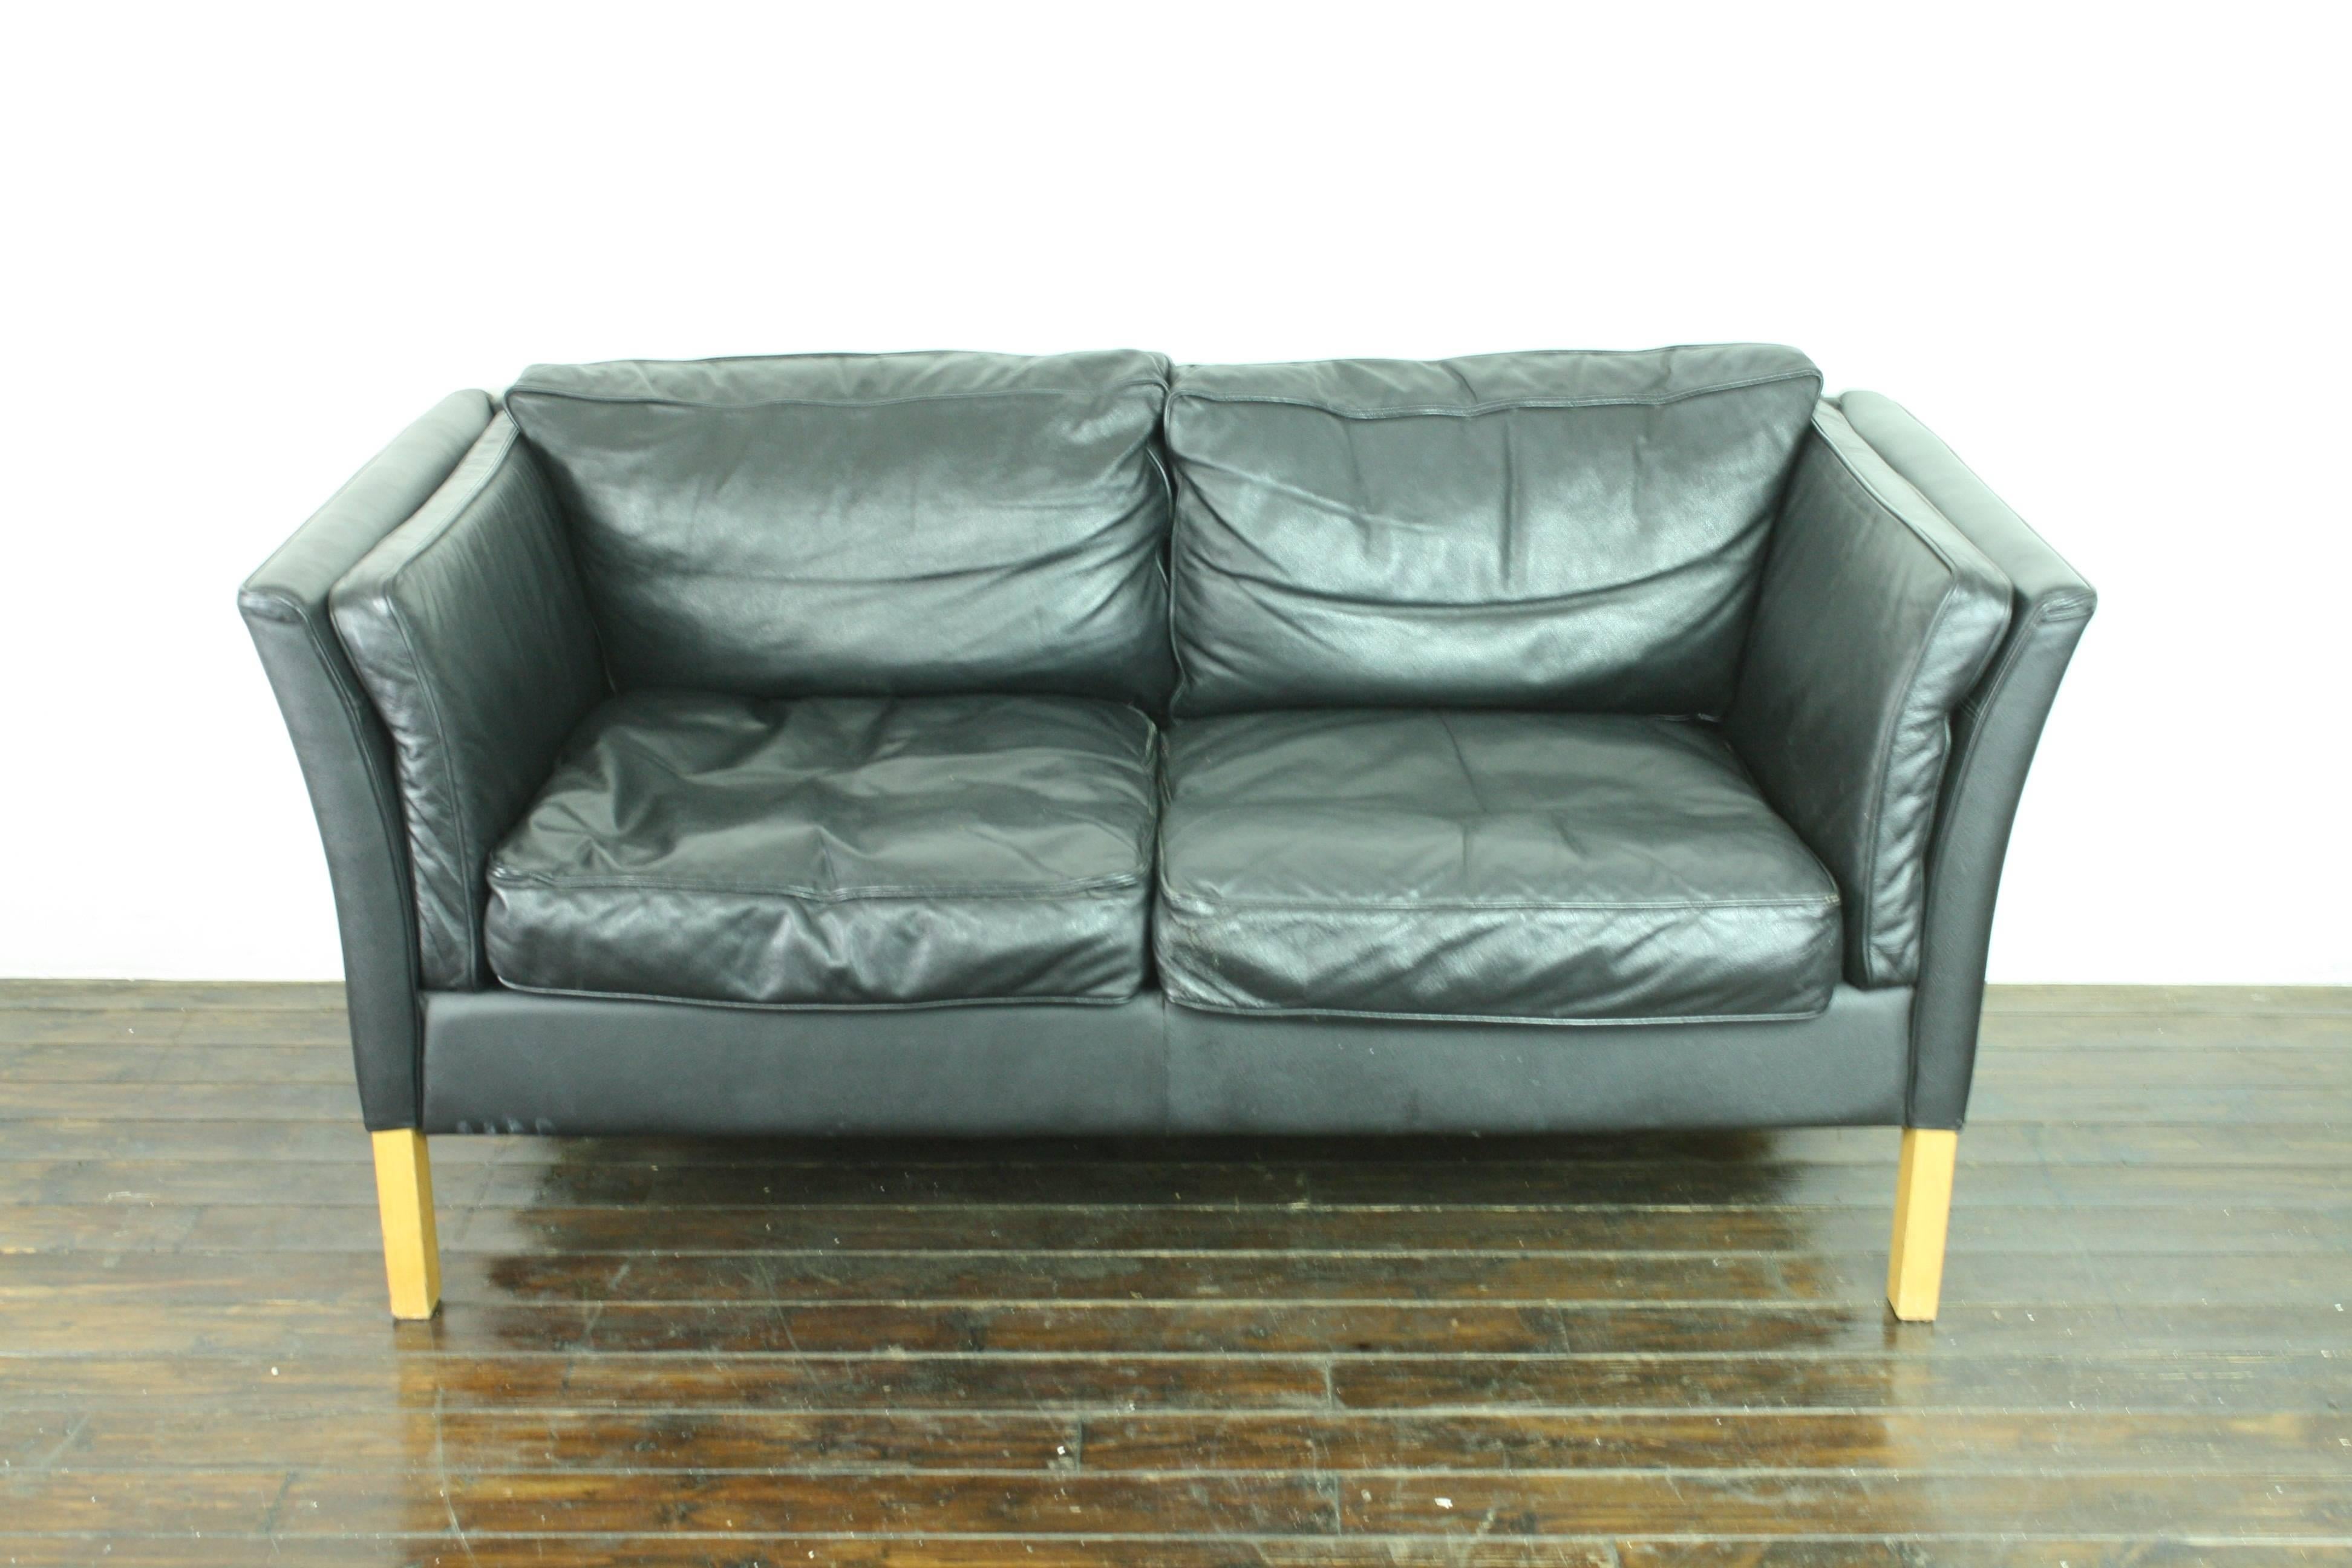 Gorgeous black leather Mogensen style 1970s two-seat sofa - we love these in black.

Detachable seat cushions. Wooden legs.

In good vintage condition; the leather is lovely and supple.

A Classic, practical piece which would work in numerous